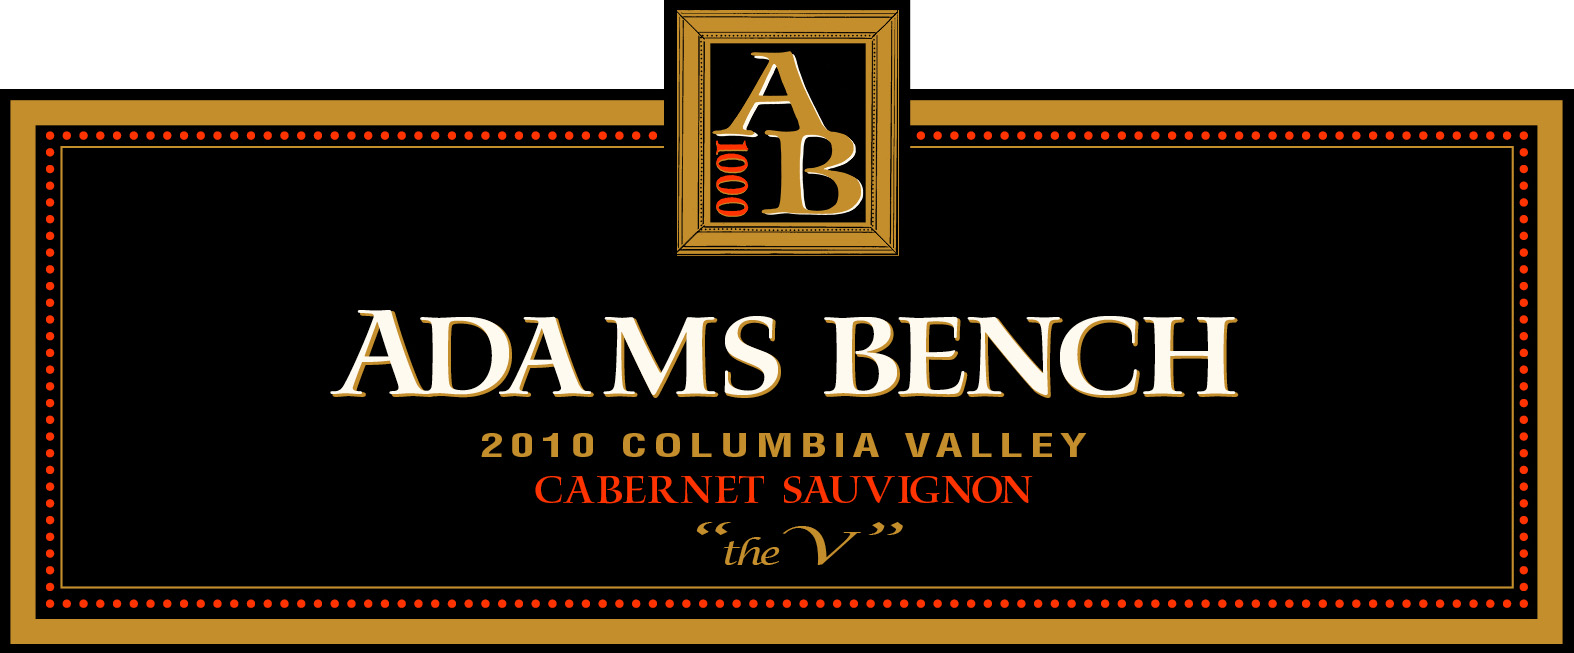 Get To Know Adams Bench Winery The Wine Write